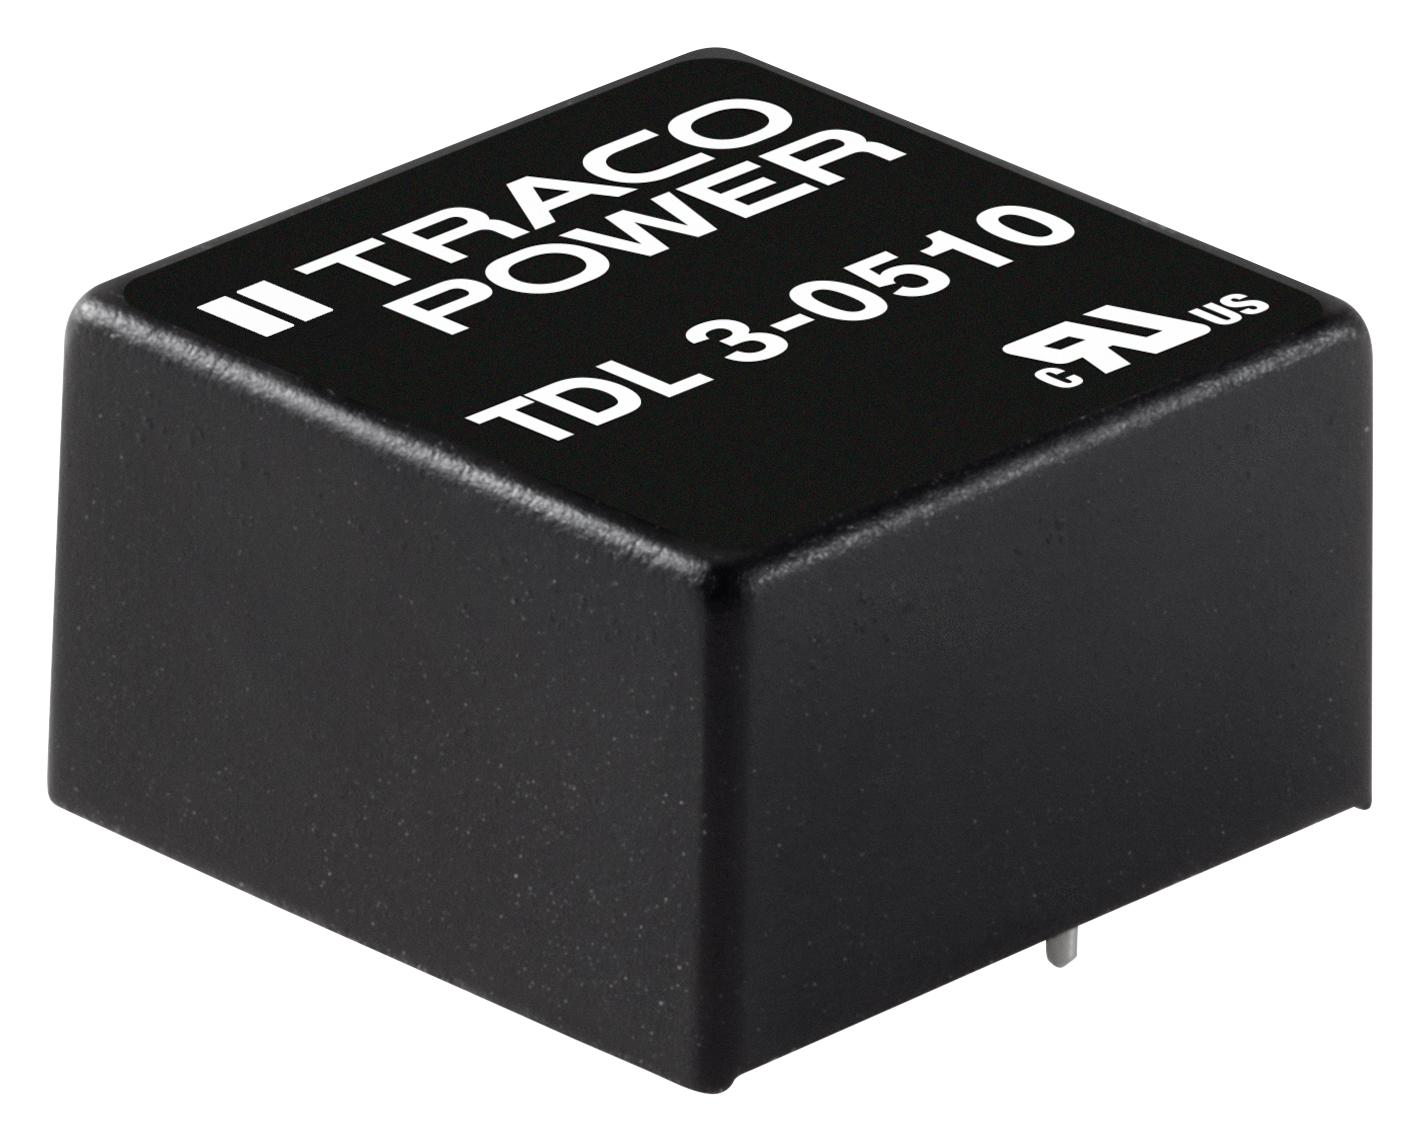 TDL 3-2423 DC-DC CONVERTER, 2 O/P, 3W TRACO POWER